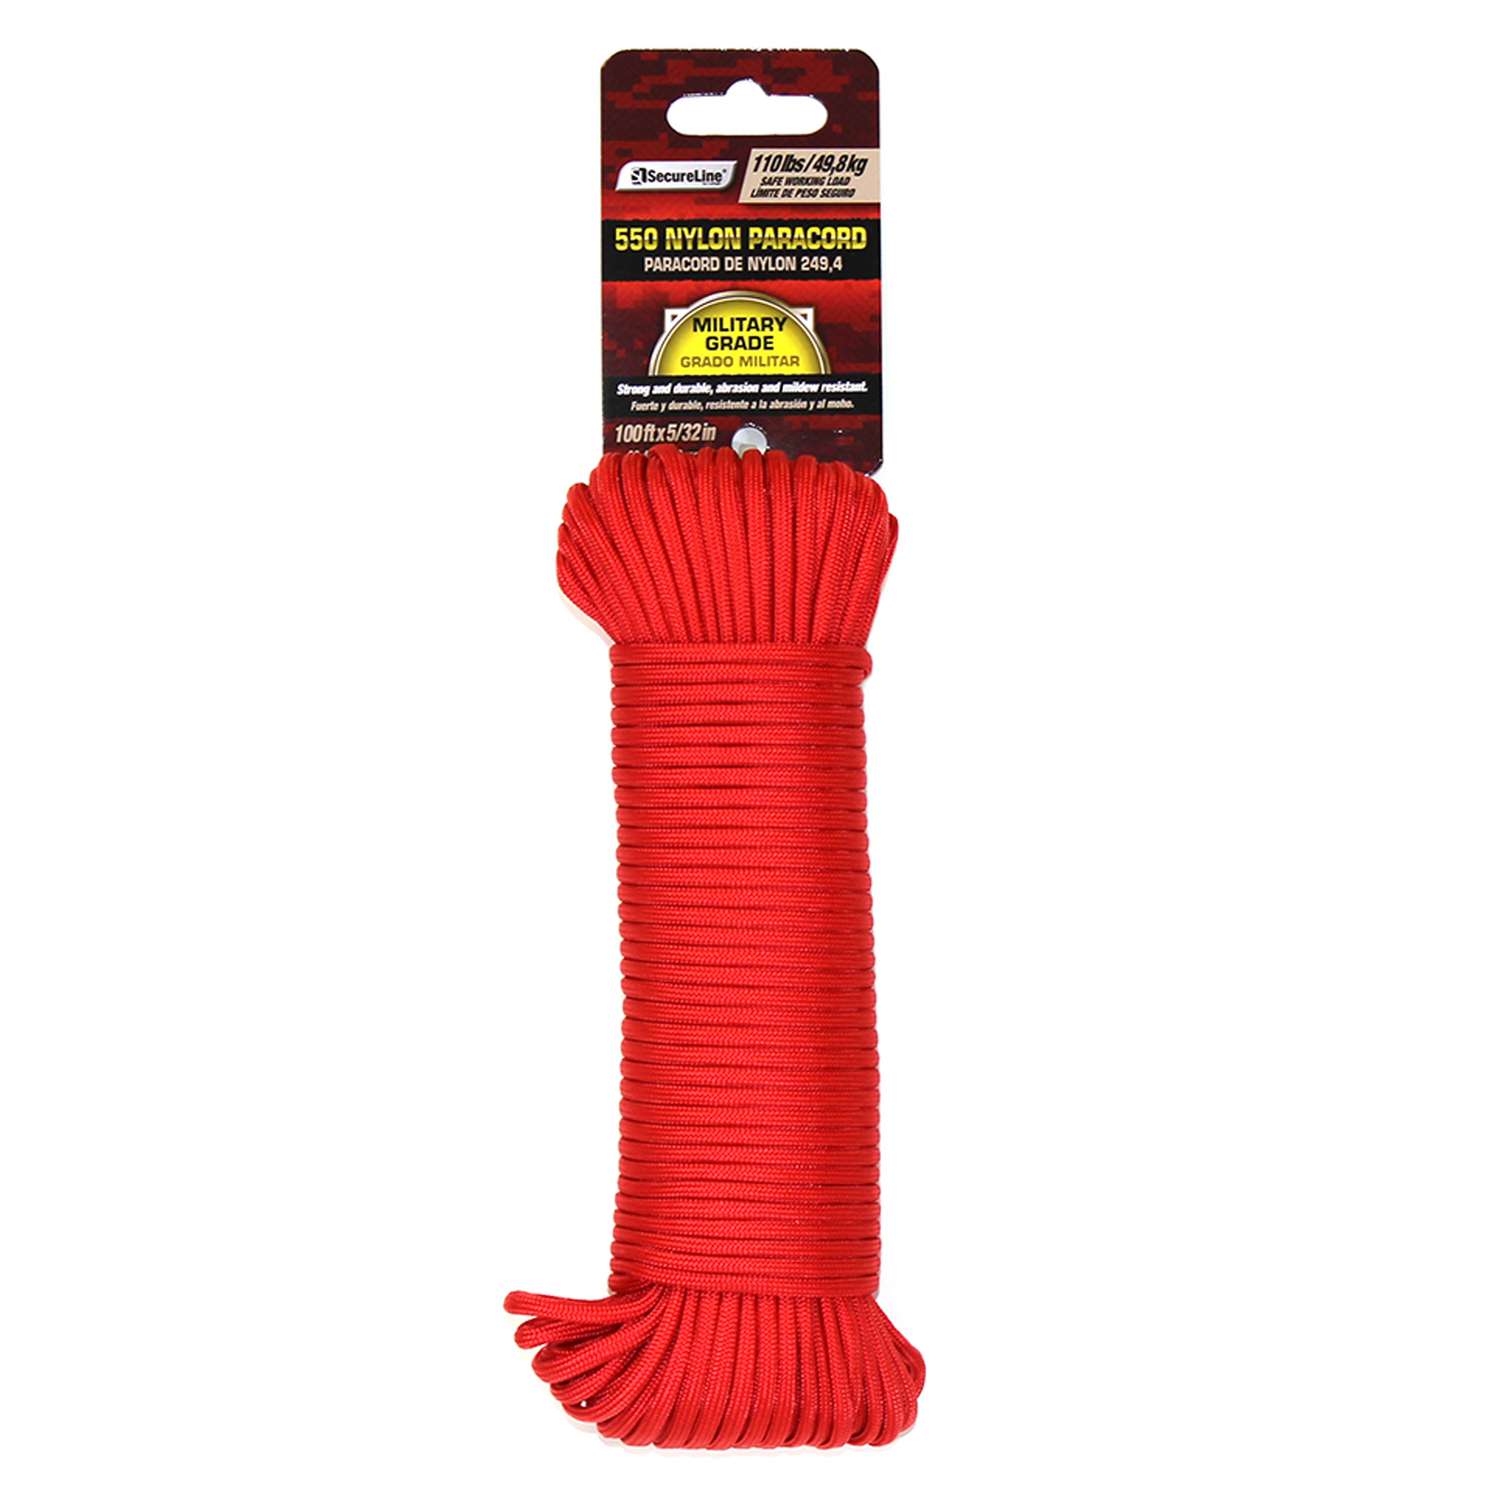 Details about   Secure Line550 Nylon Paracord  400 Feet red 500LB Max Load 